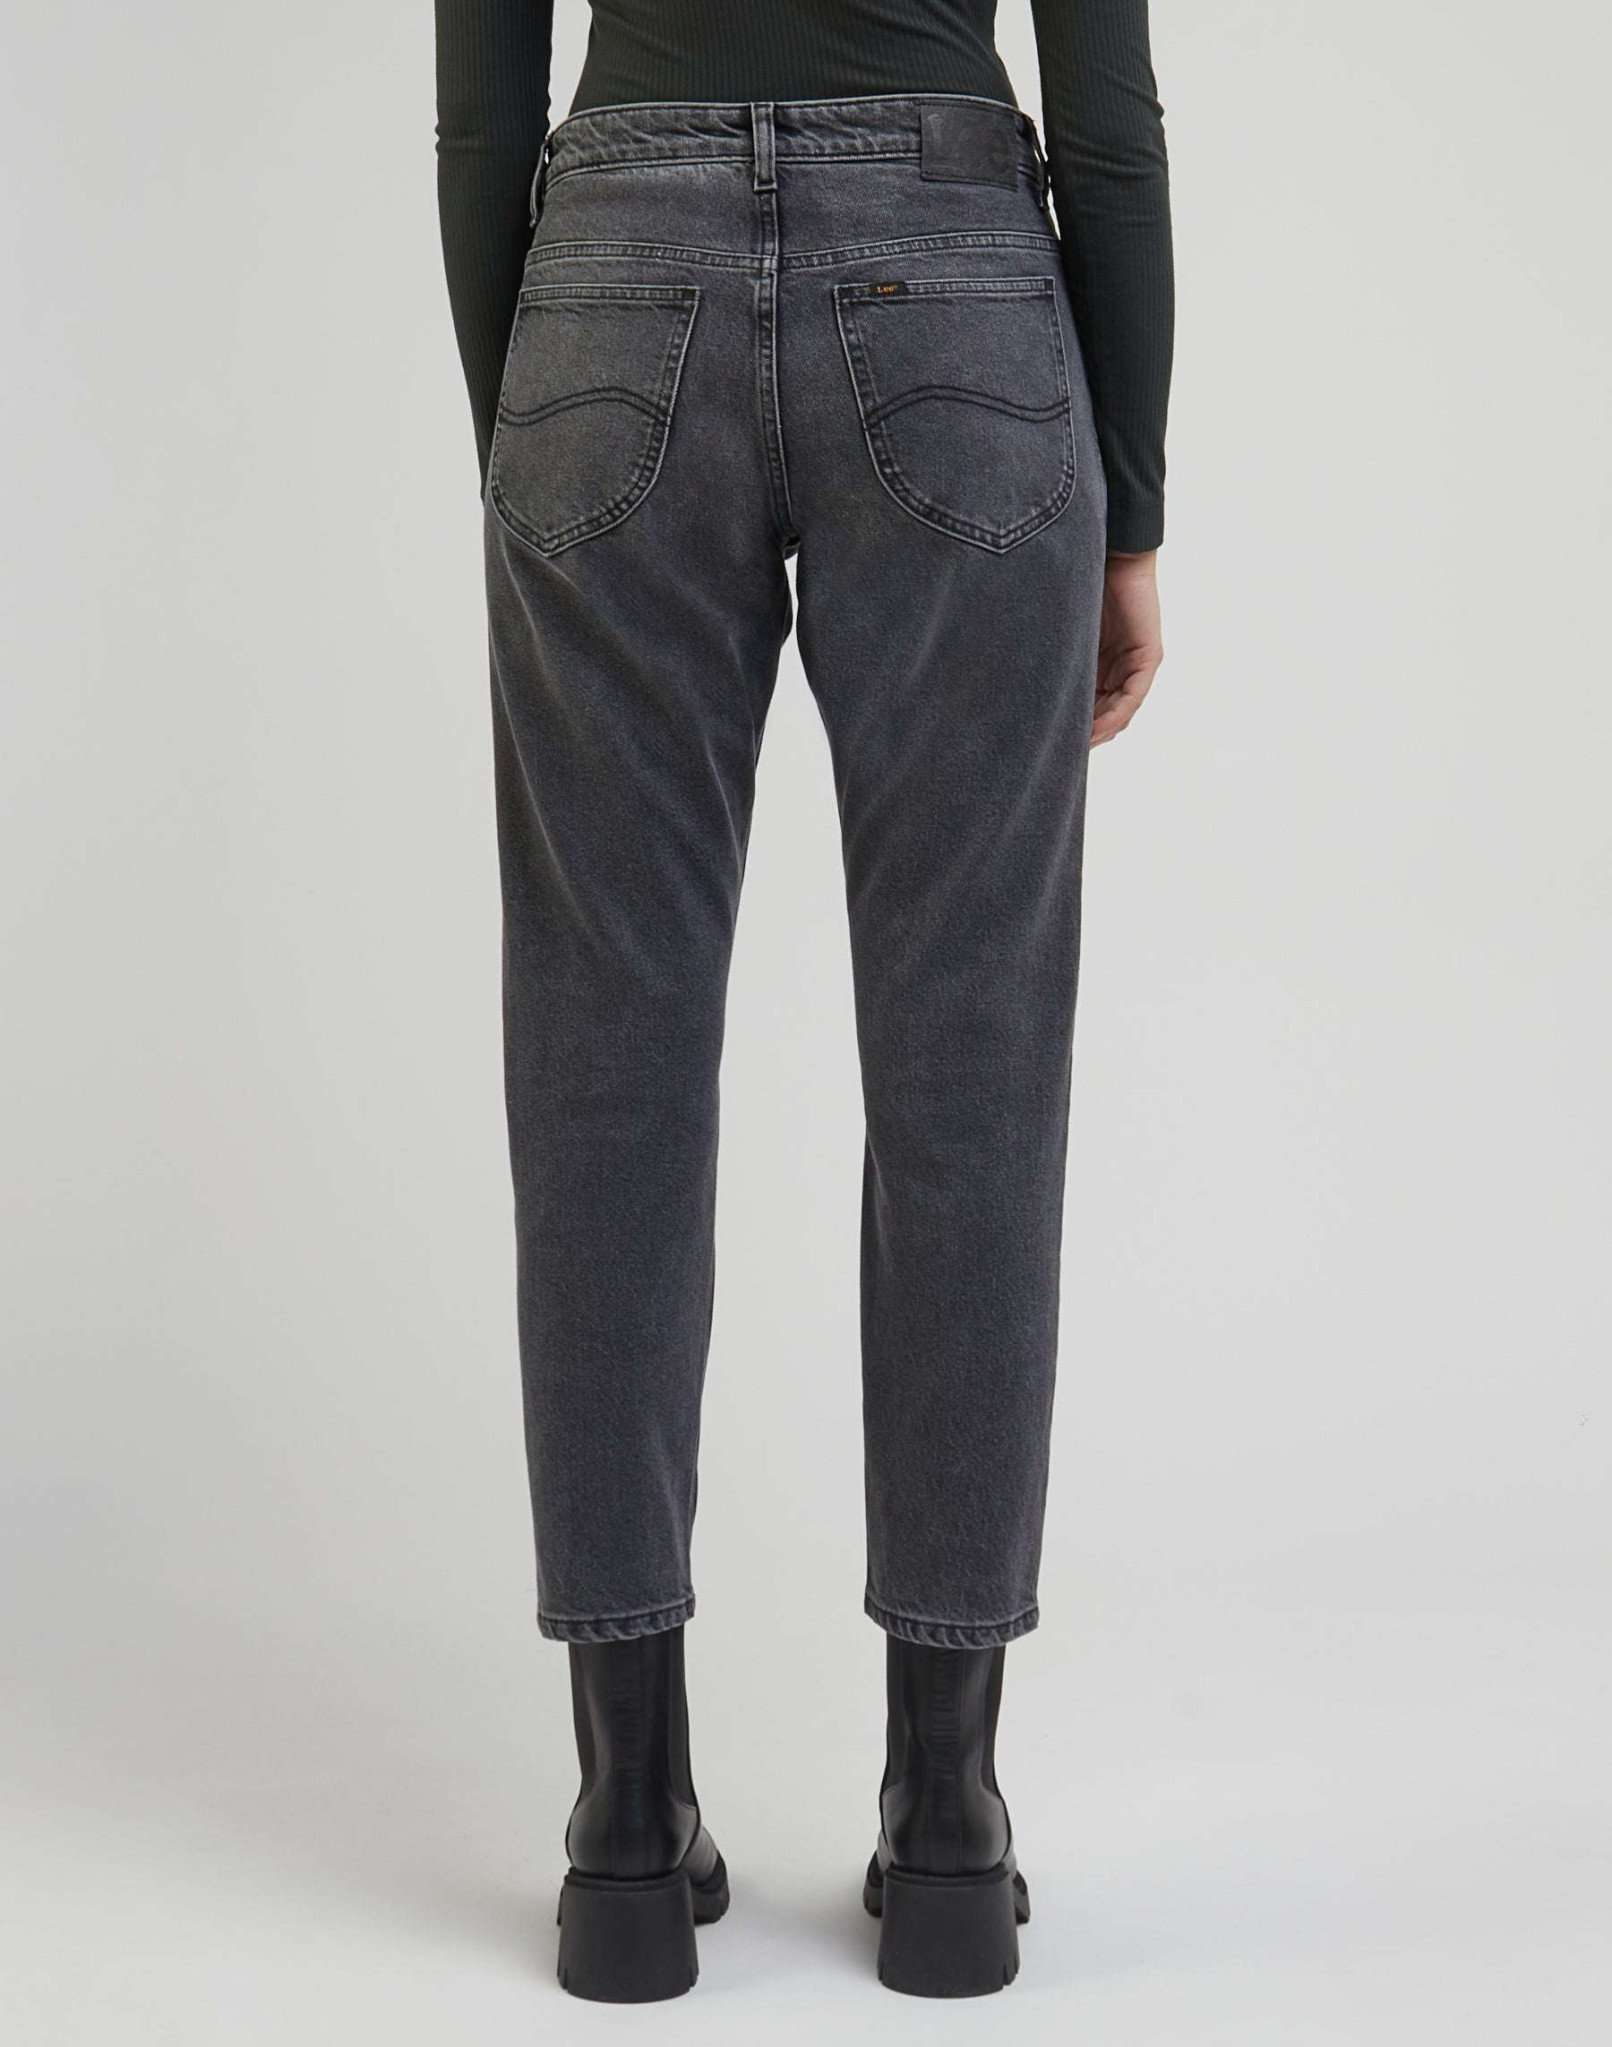 Rider Jeans in Refined Black Jeans Lee   